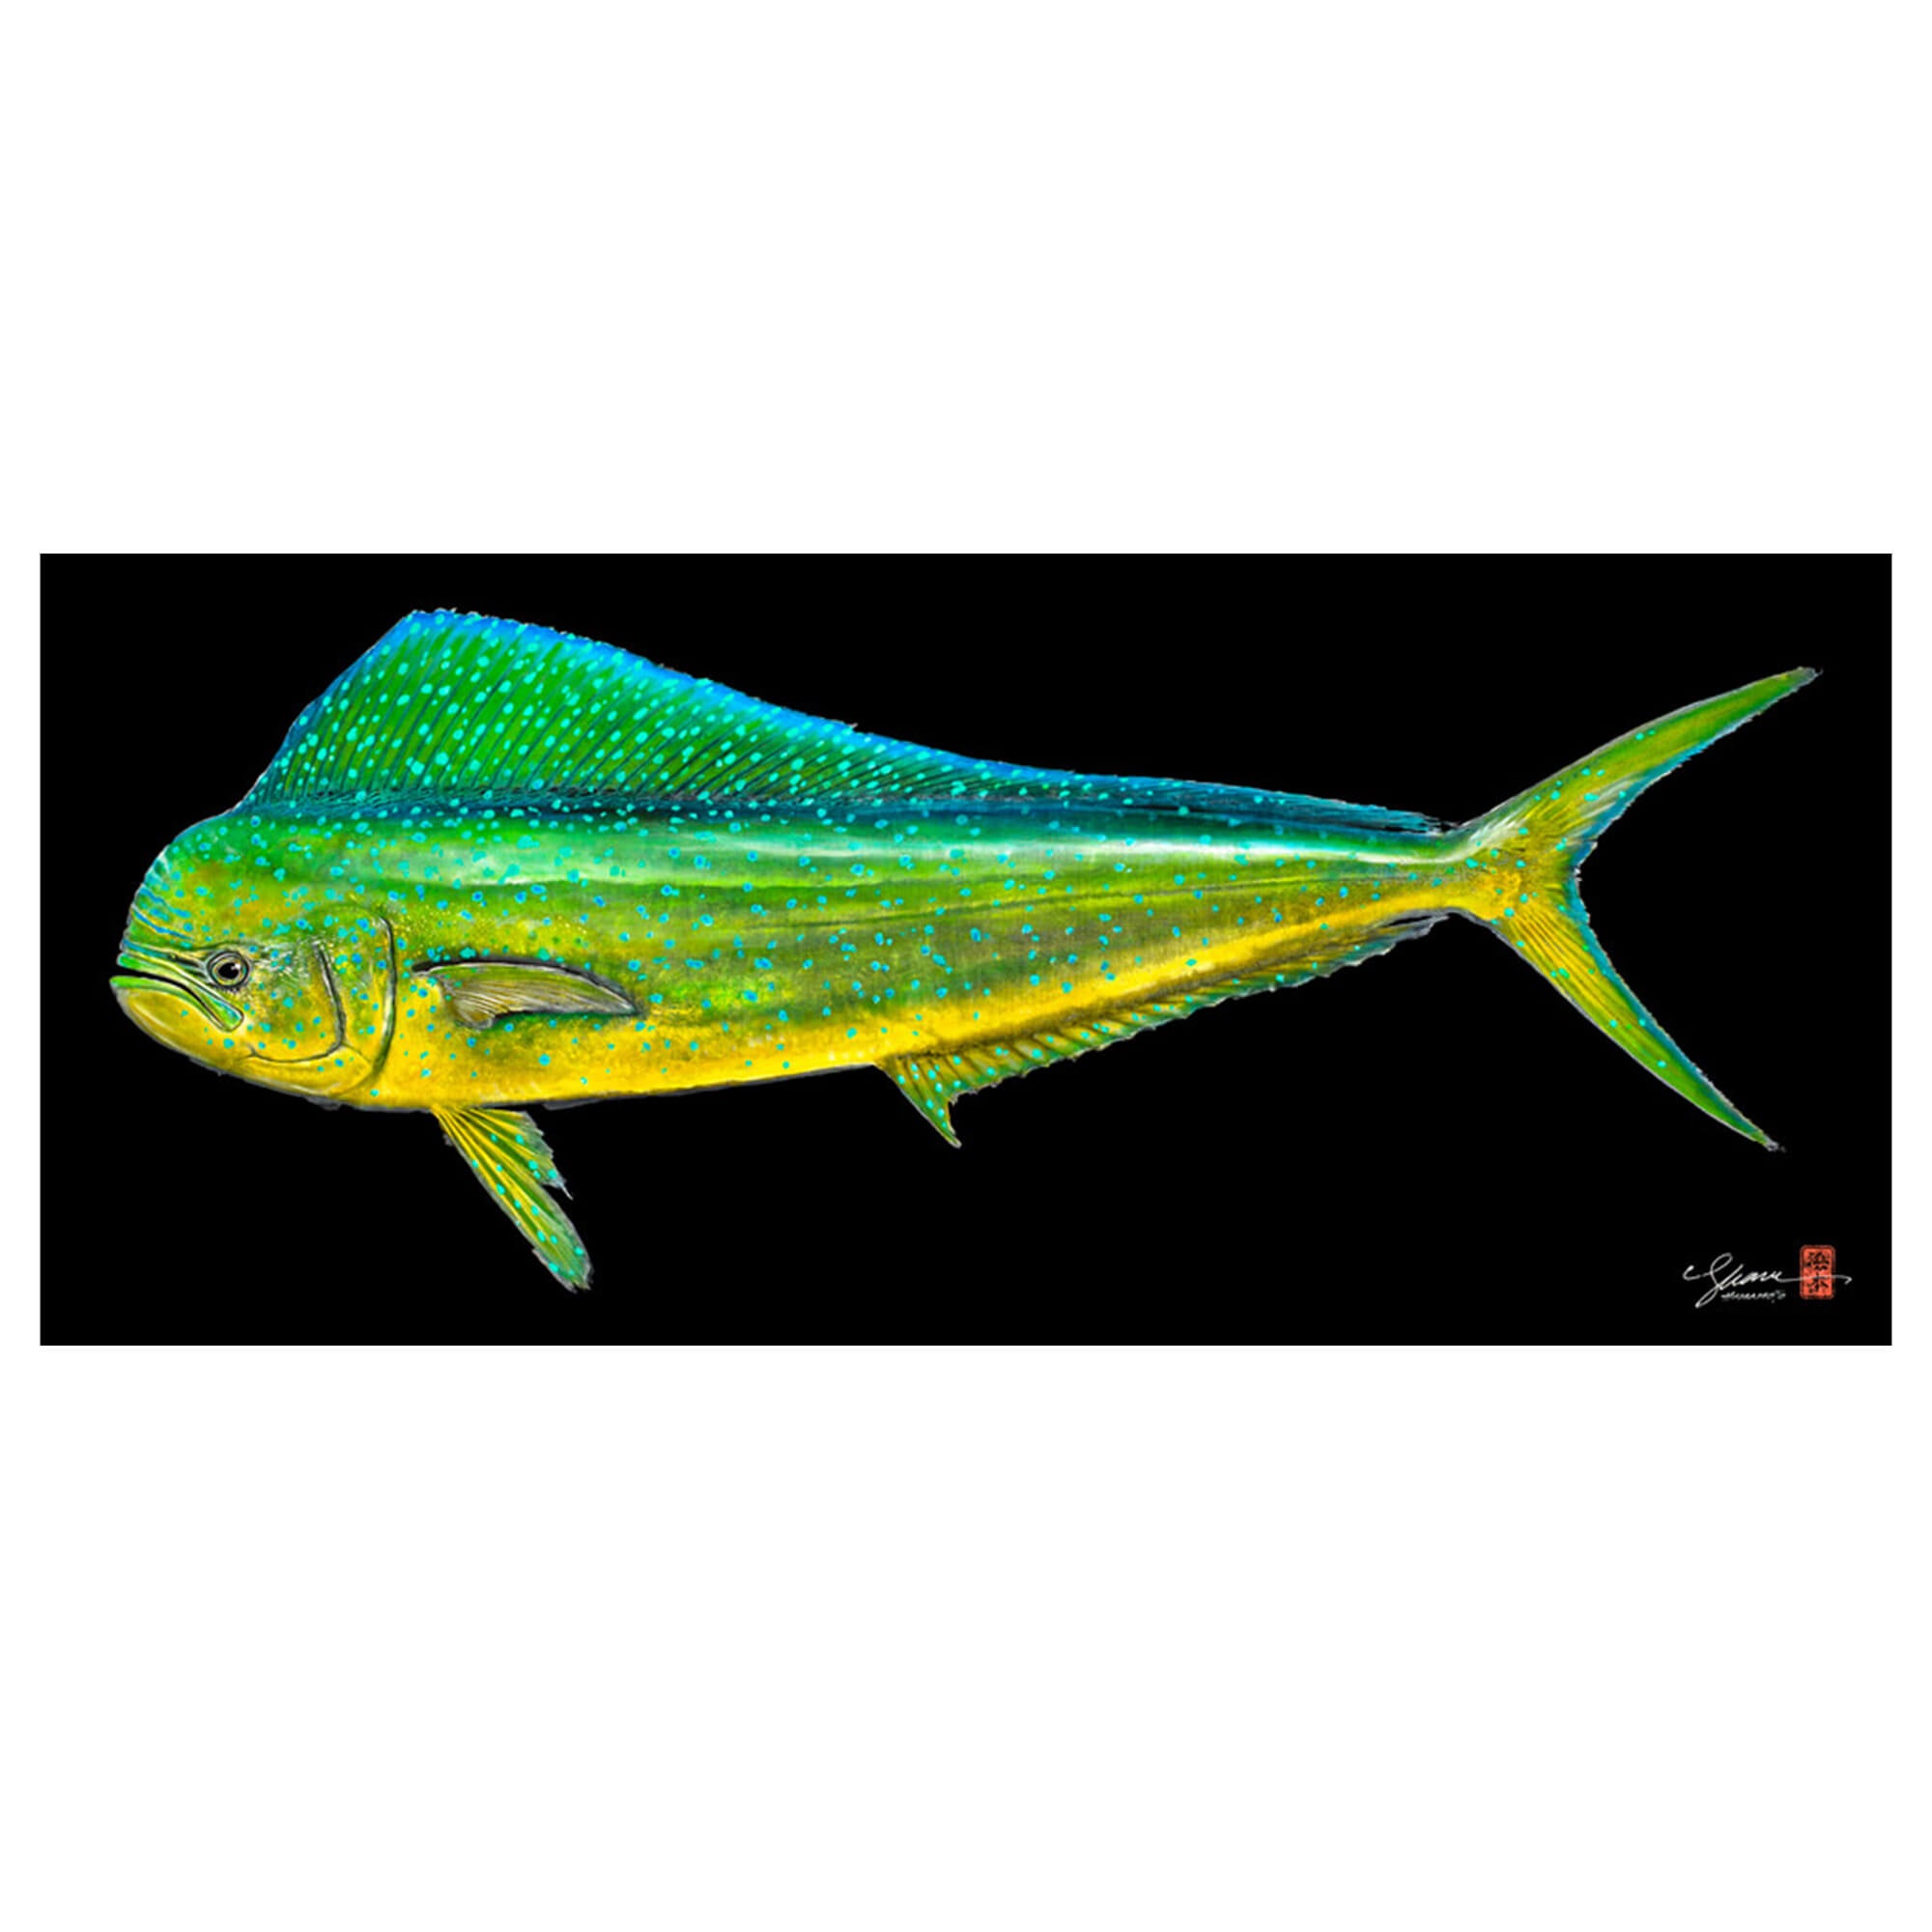 A metal art print of a large Mahi Mahi fish (also known as Dolphin Fish or Dorado) distinguished by dazzling colors - golden on the sides, and bright blues and greens on the sides and back by Hawaii Gyotaku artist Shane Hamamoto